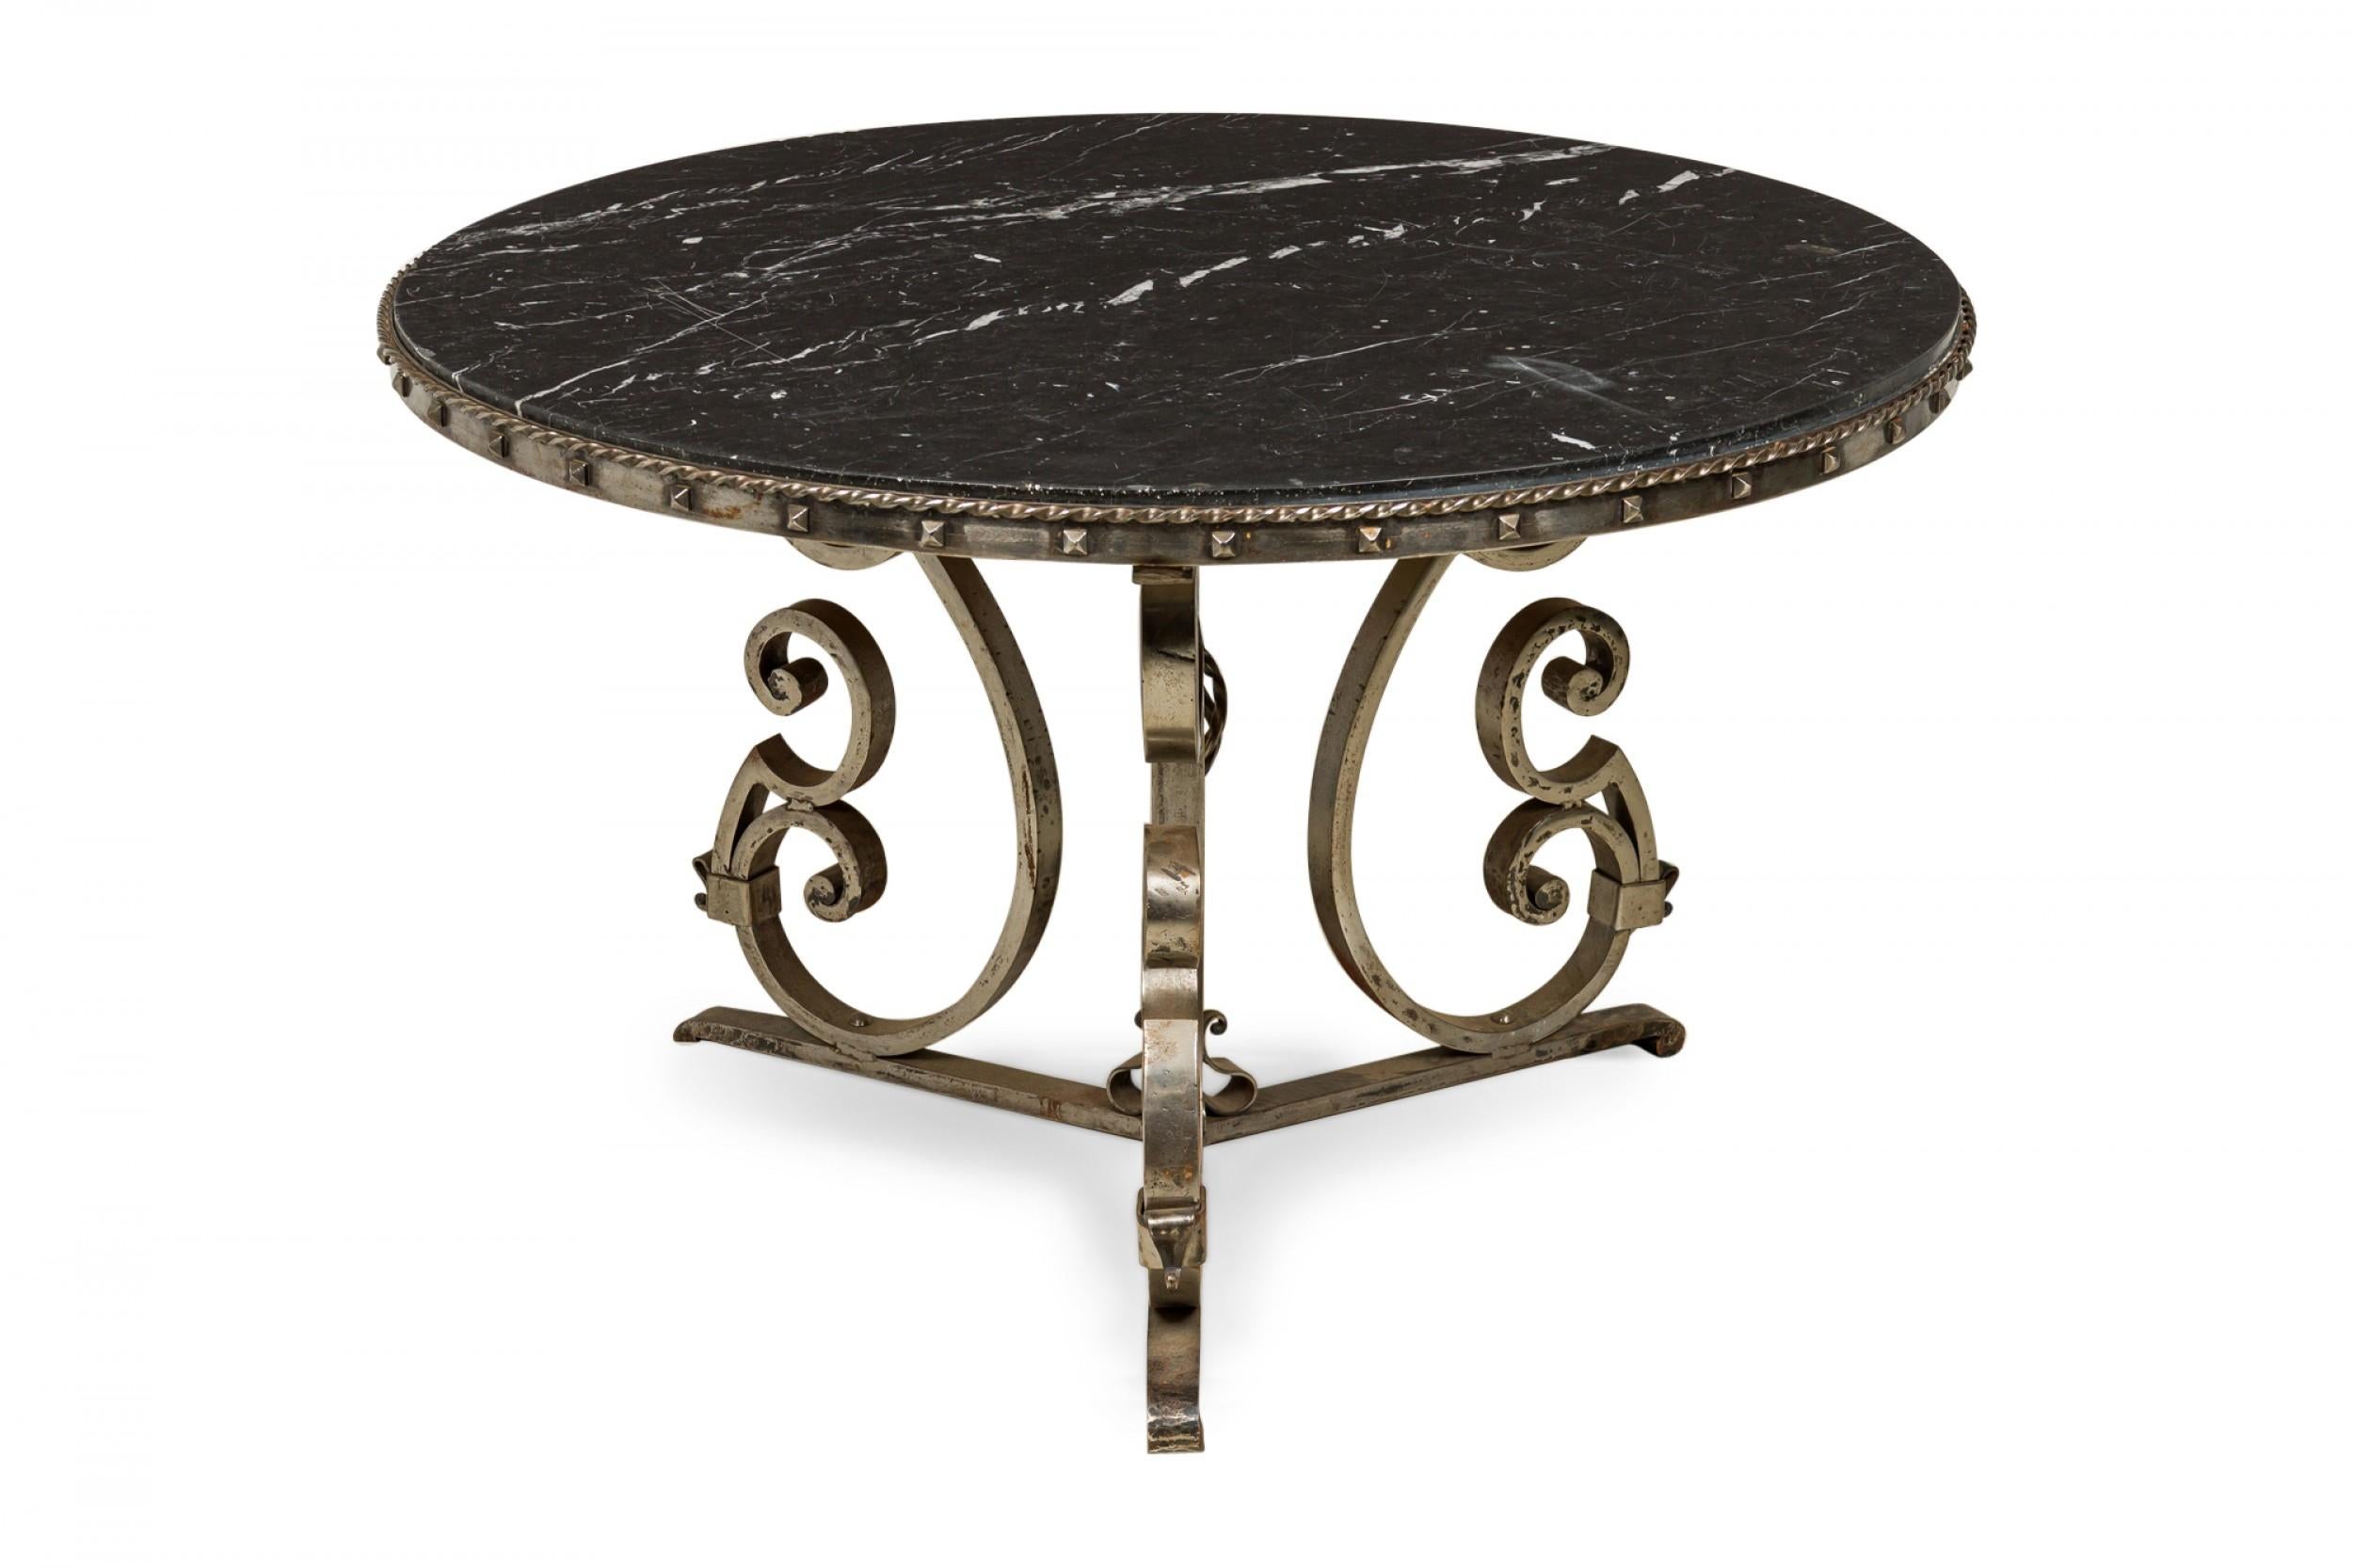 20th Century French Art Deco Iron and Black Marble Circular Scoll Form Center Table For Sale